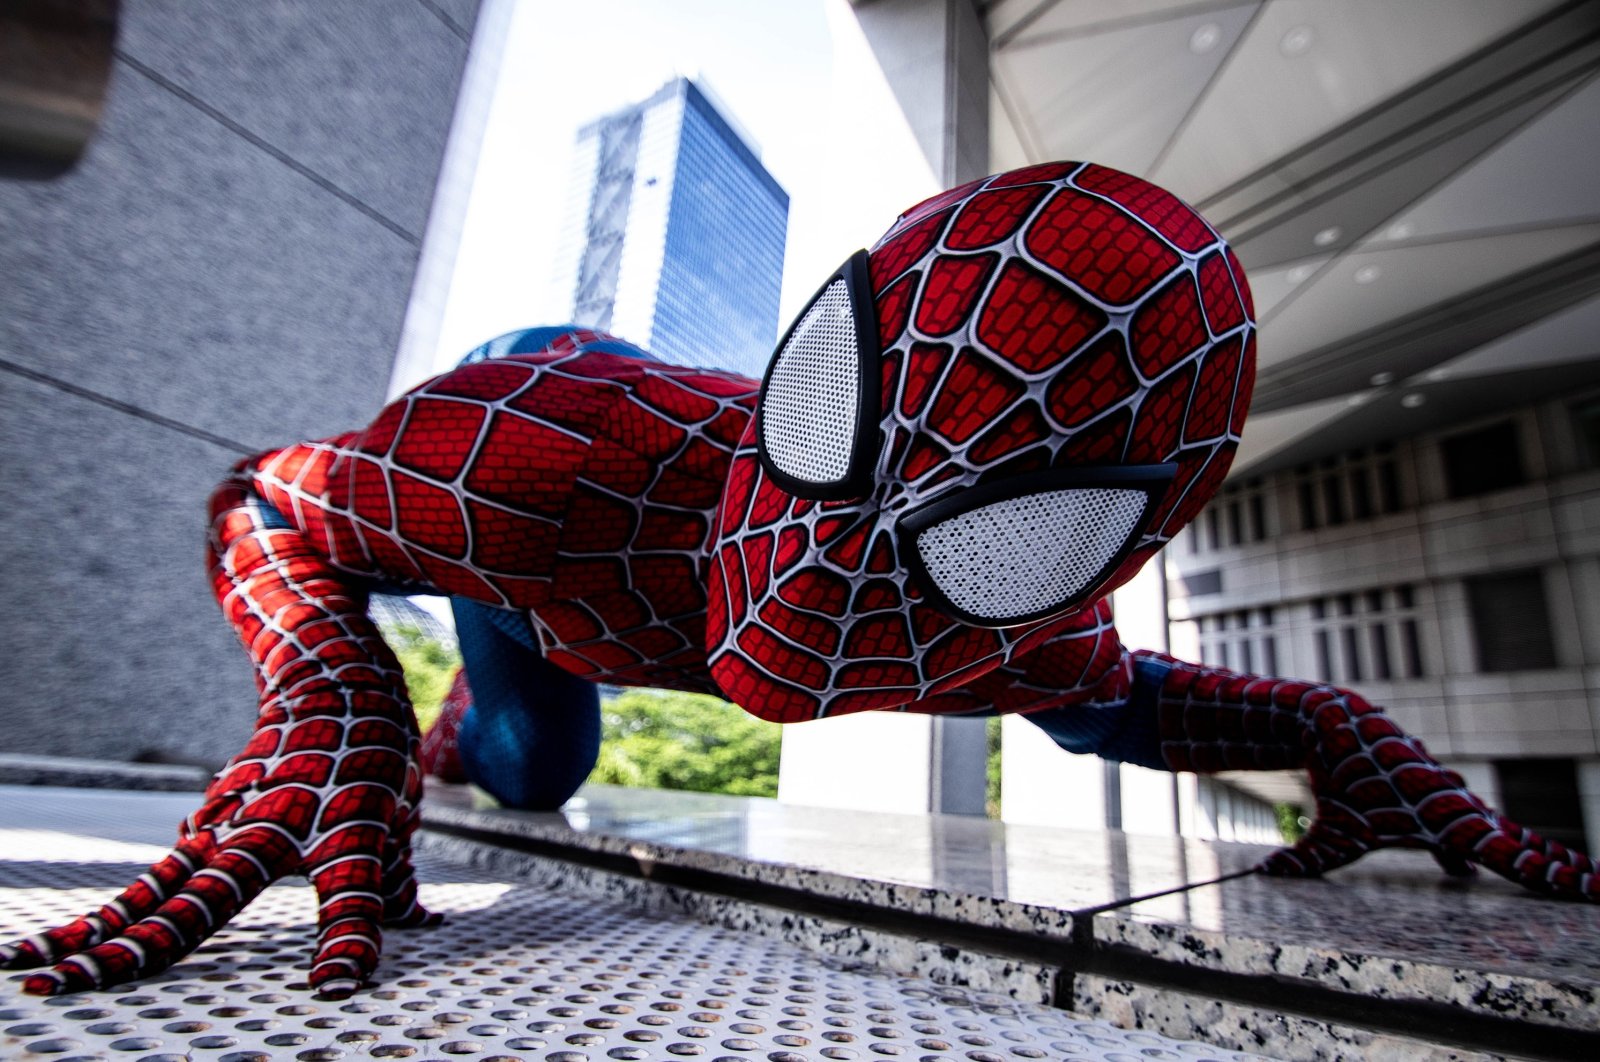 A man in superhero costume comic marvel Spider-Man on the street, Tokyo, Japan, June 15, 2019. (Photo by Shutterstock)